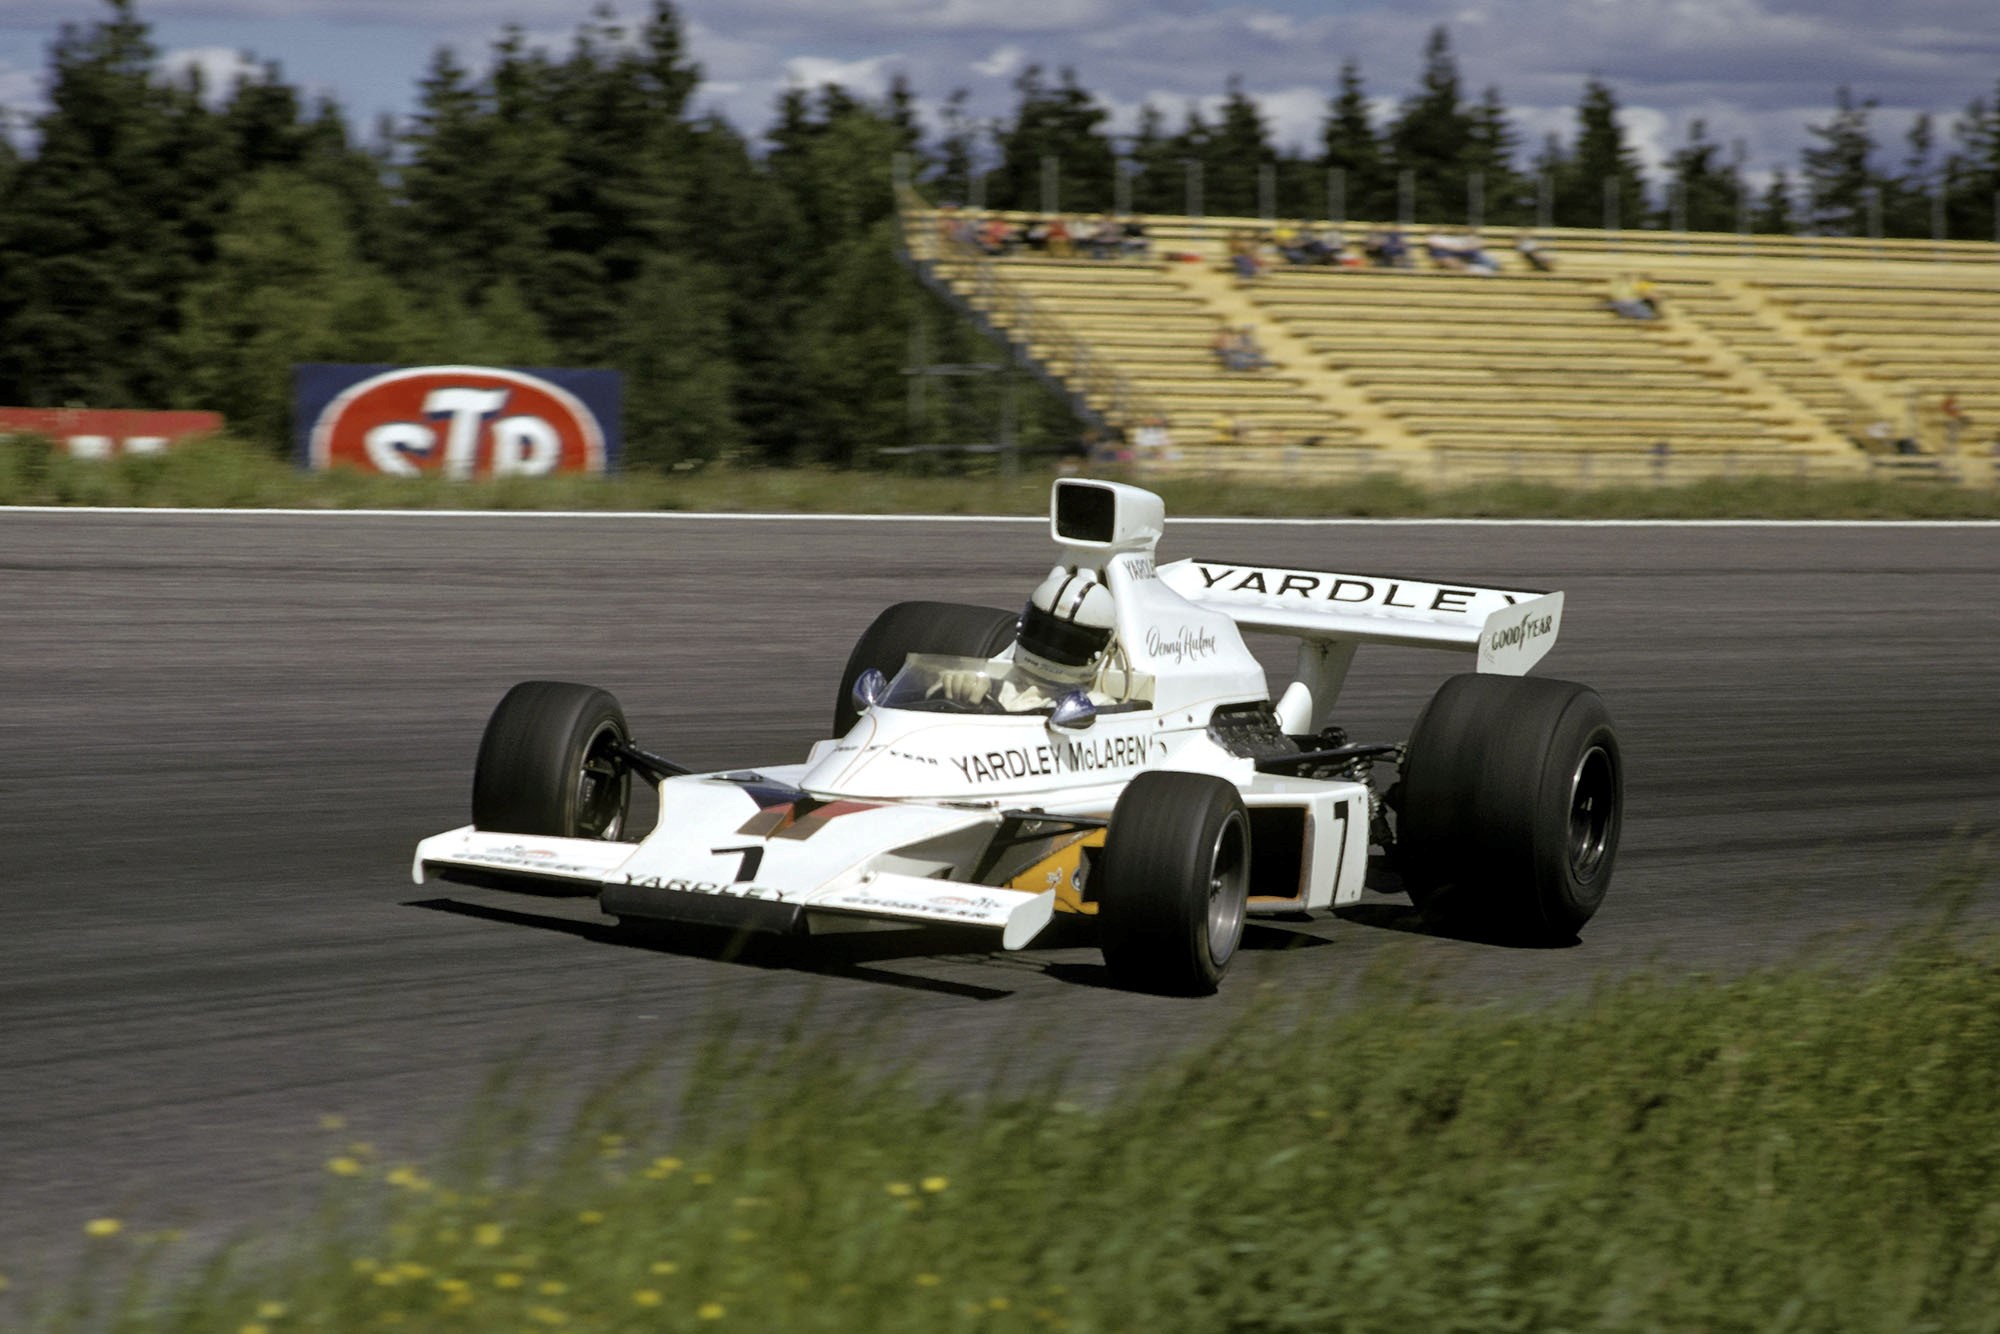 Denny Hulme took his frist win of the season driving for McLaren.